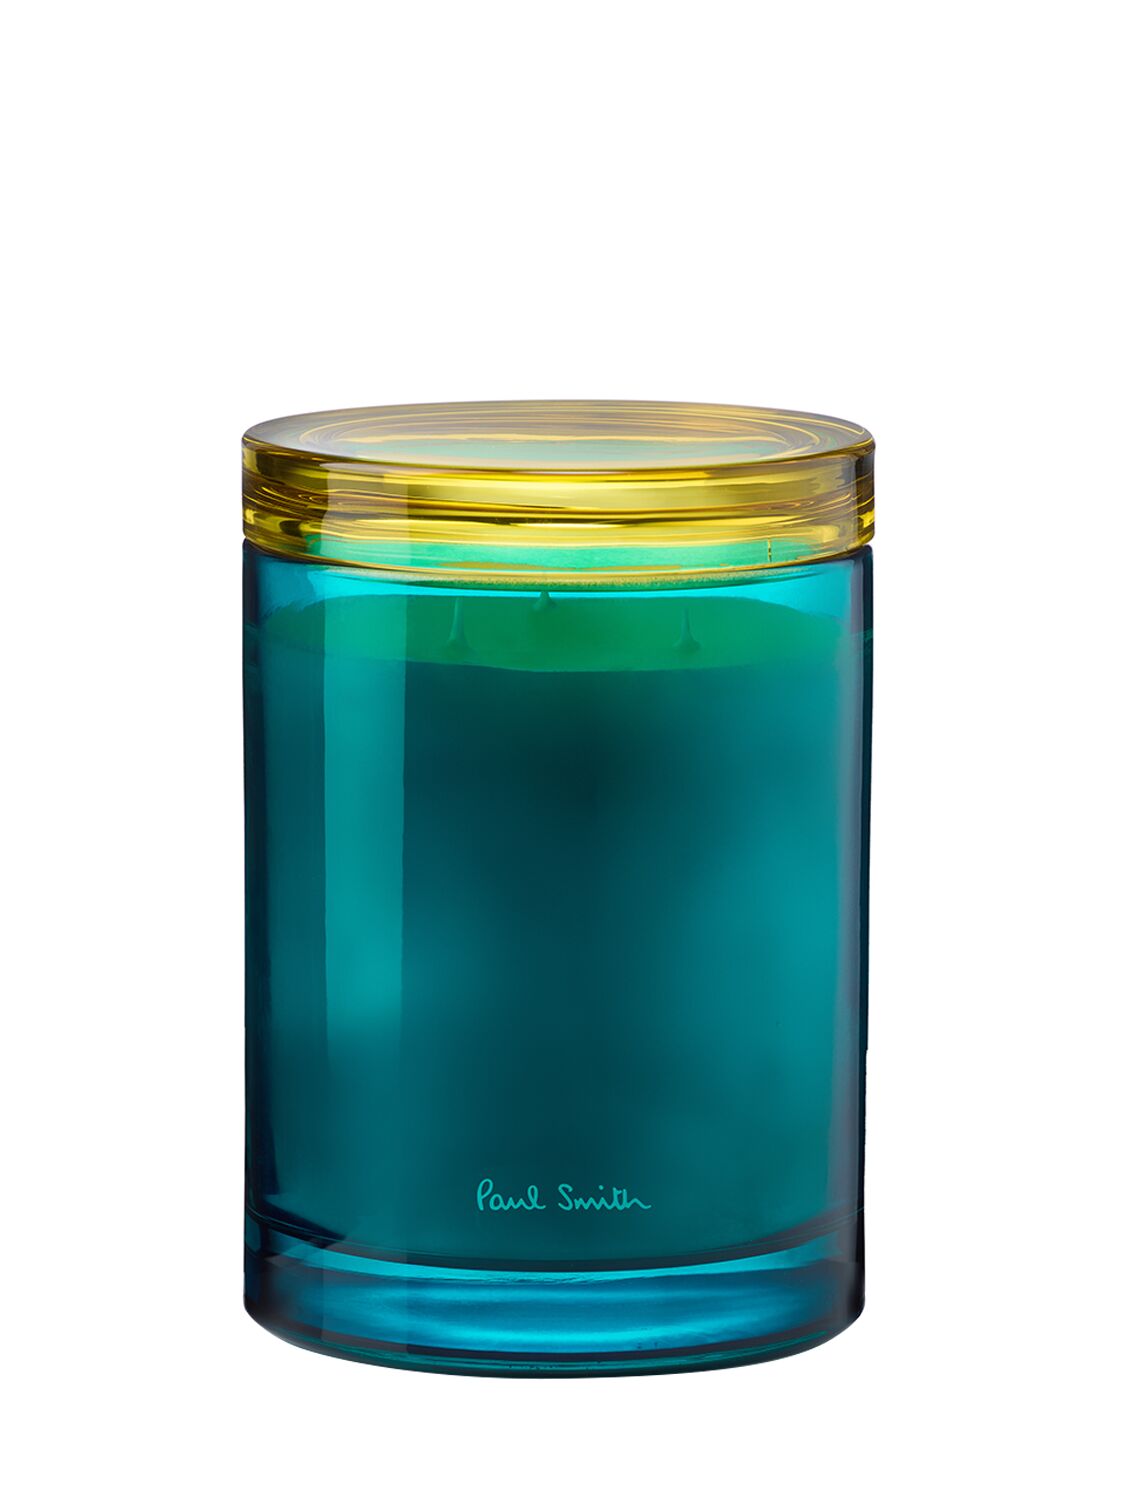 Image of 1kg Paul Smith Sunseeker Candle